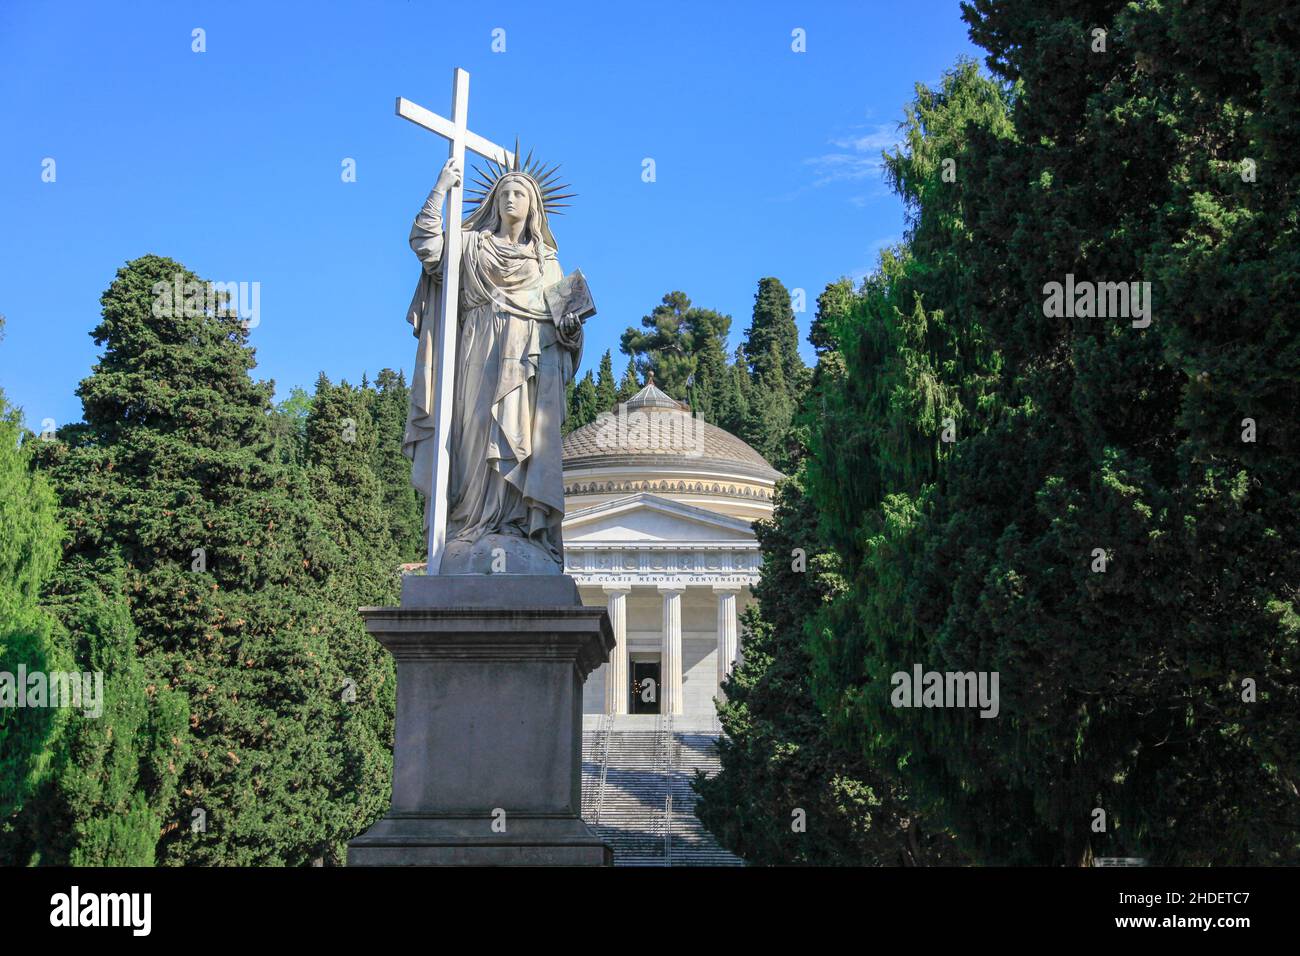 The 9m high statue of Faith with the Pantheon behind at the Monumental Cemetery of Staglieno (Cimitero monumentale di Staglieno), Genoa, Italy Stock Photo